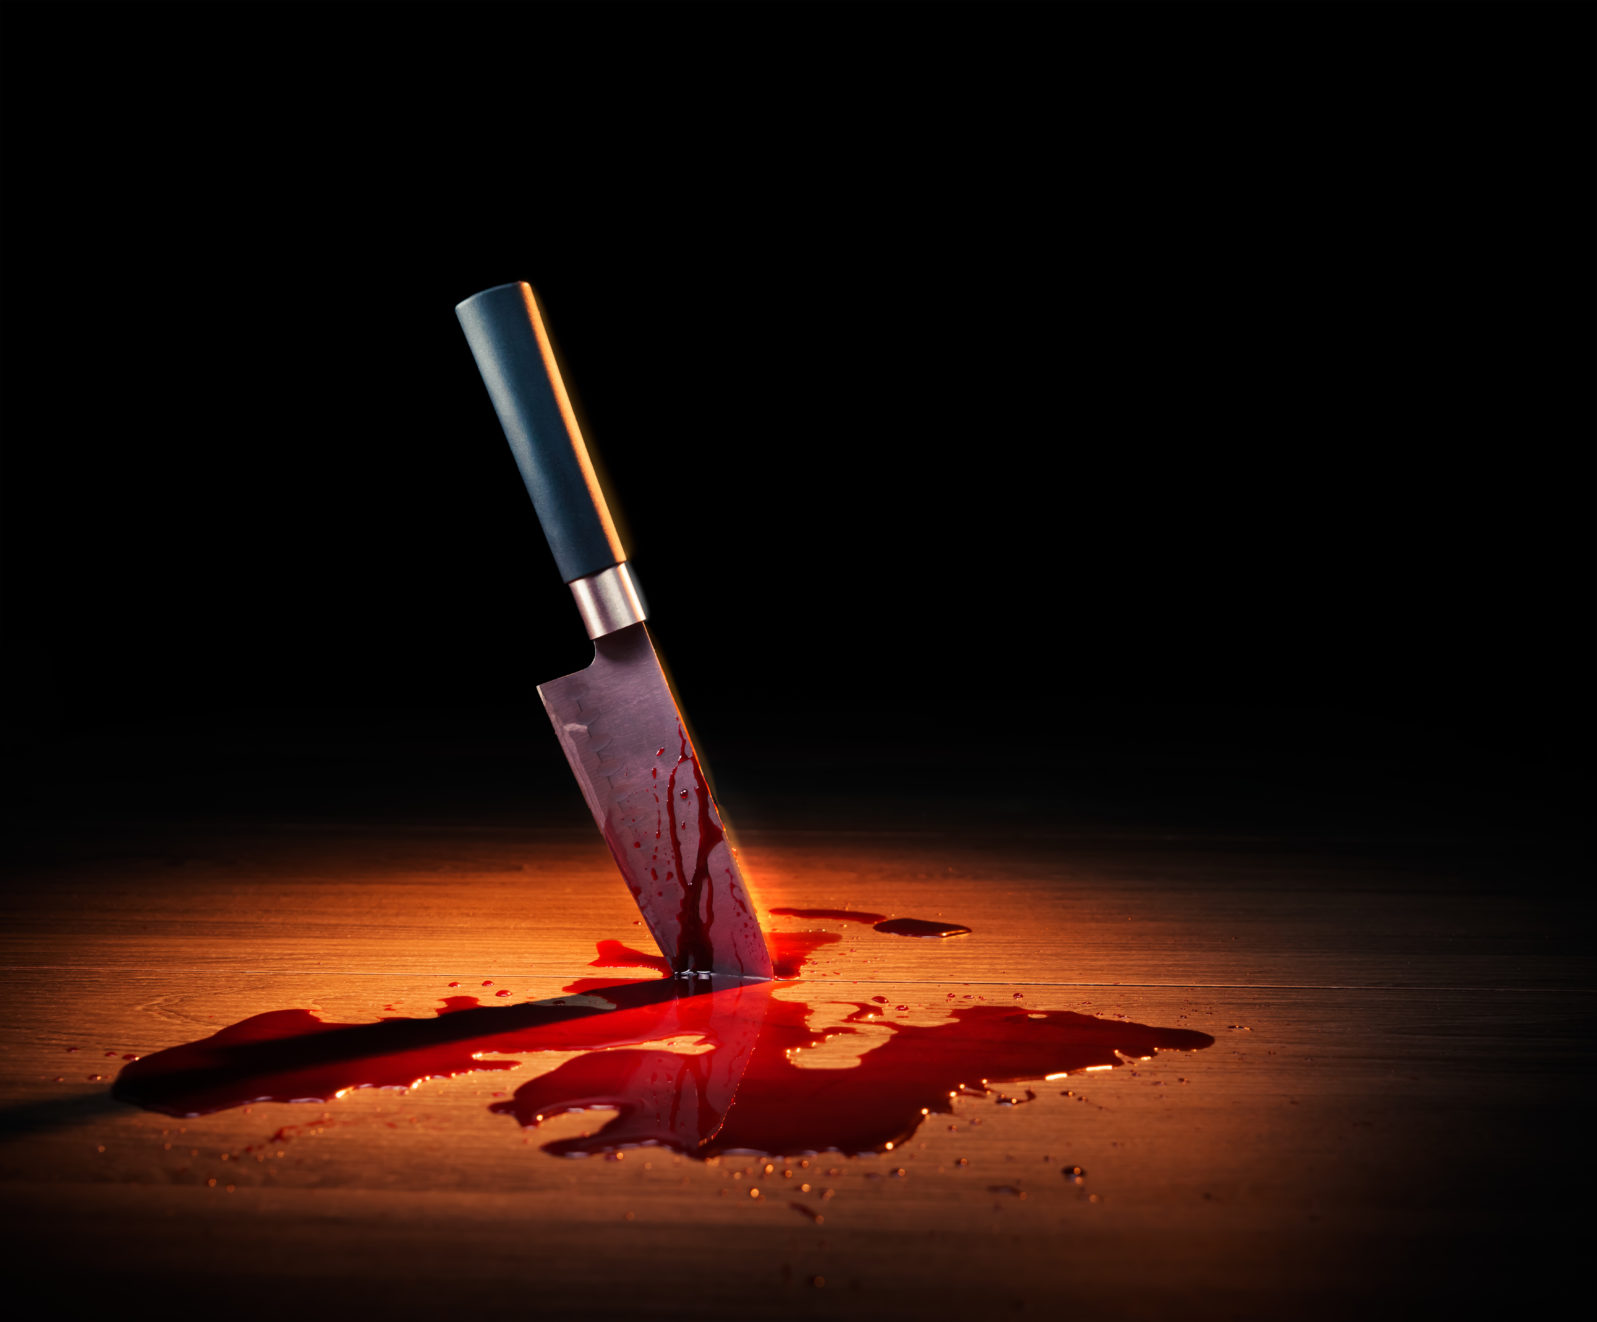 dramatic lit image of a bloody crime scene with a knife on the floor